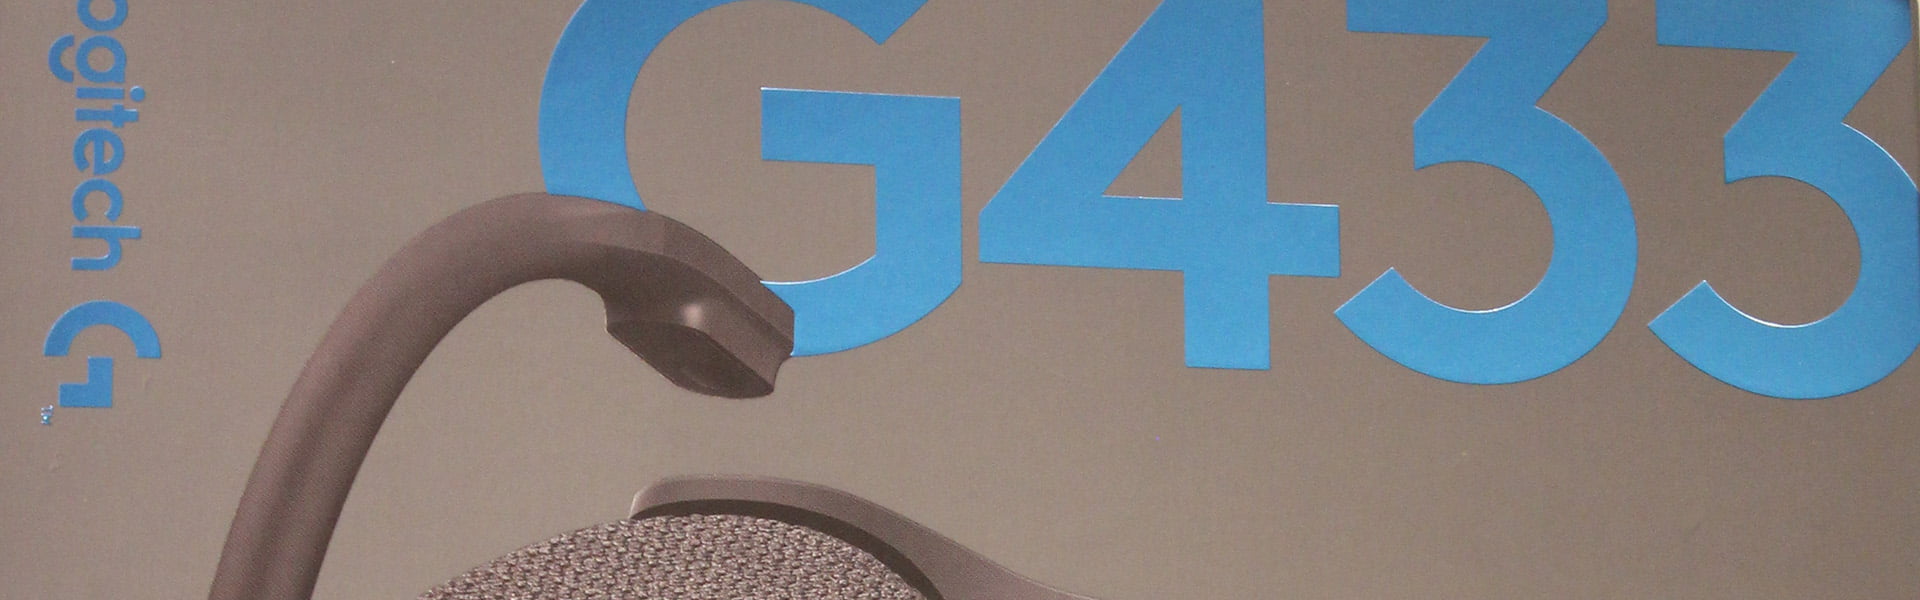 Logitech G433 Gaming Headset Review 14